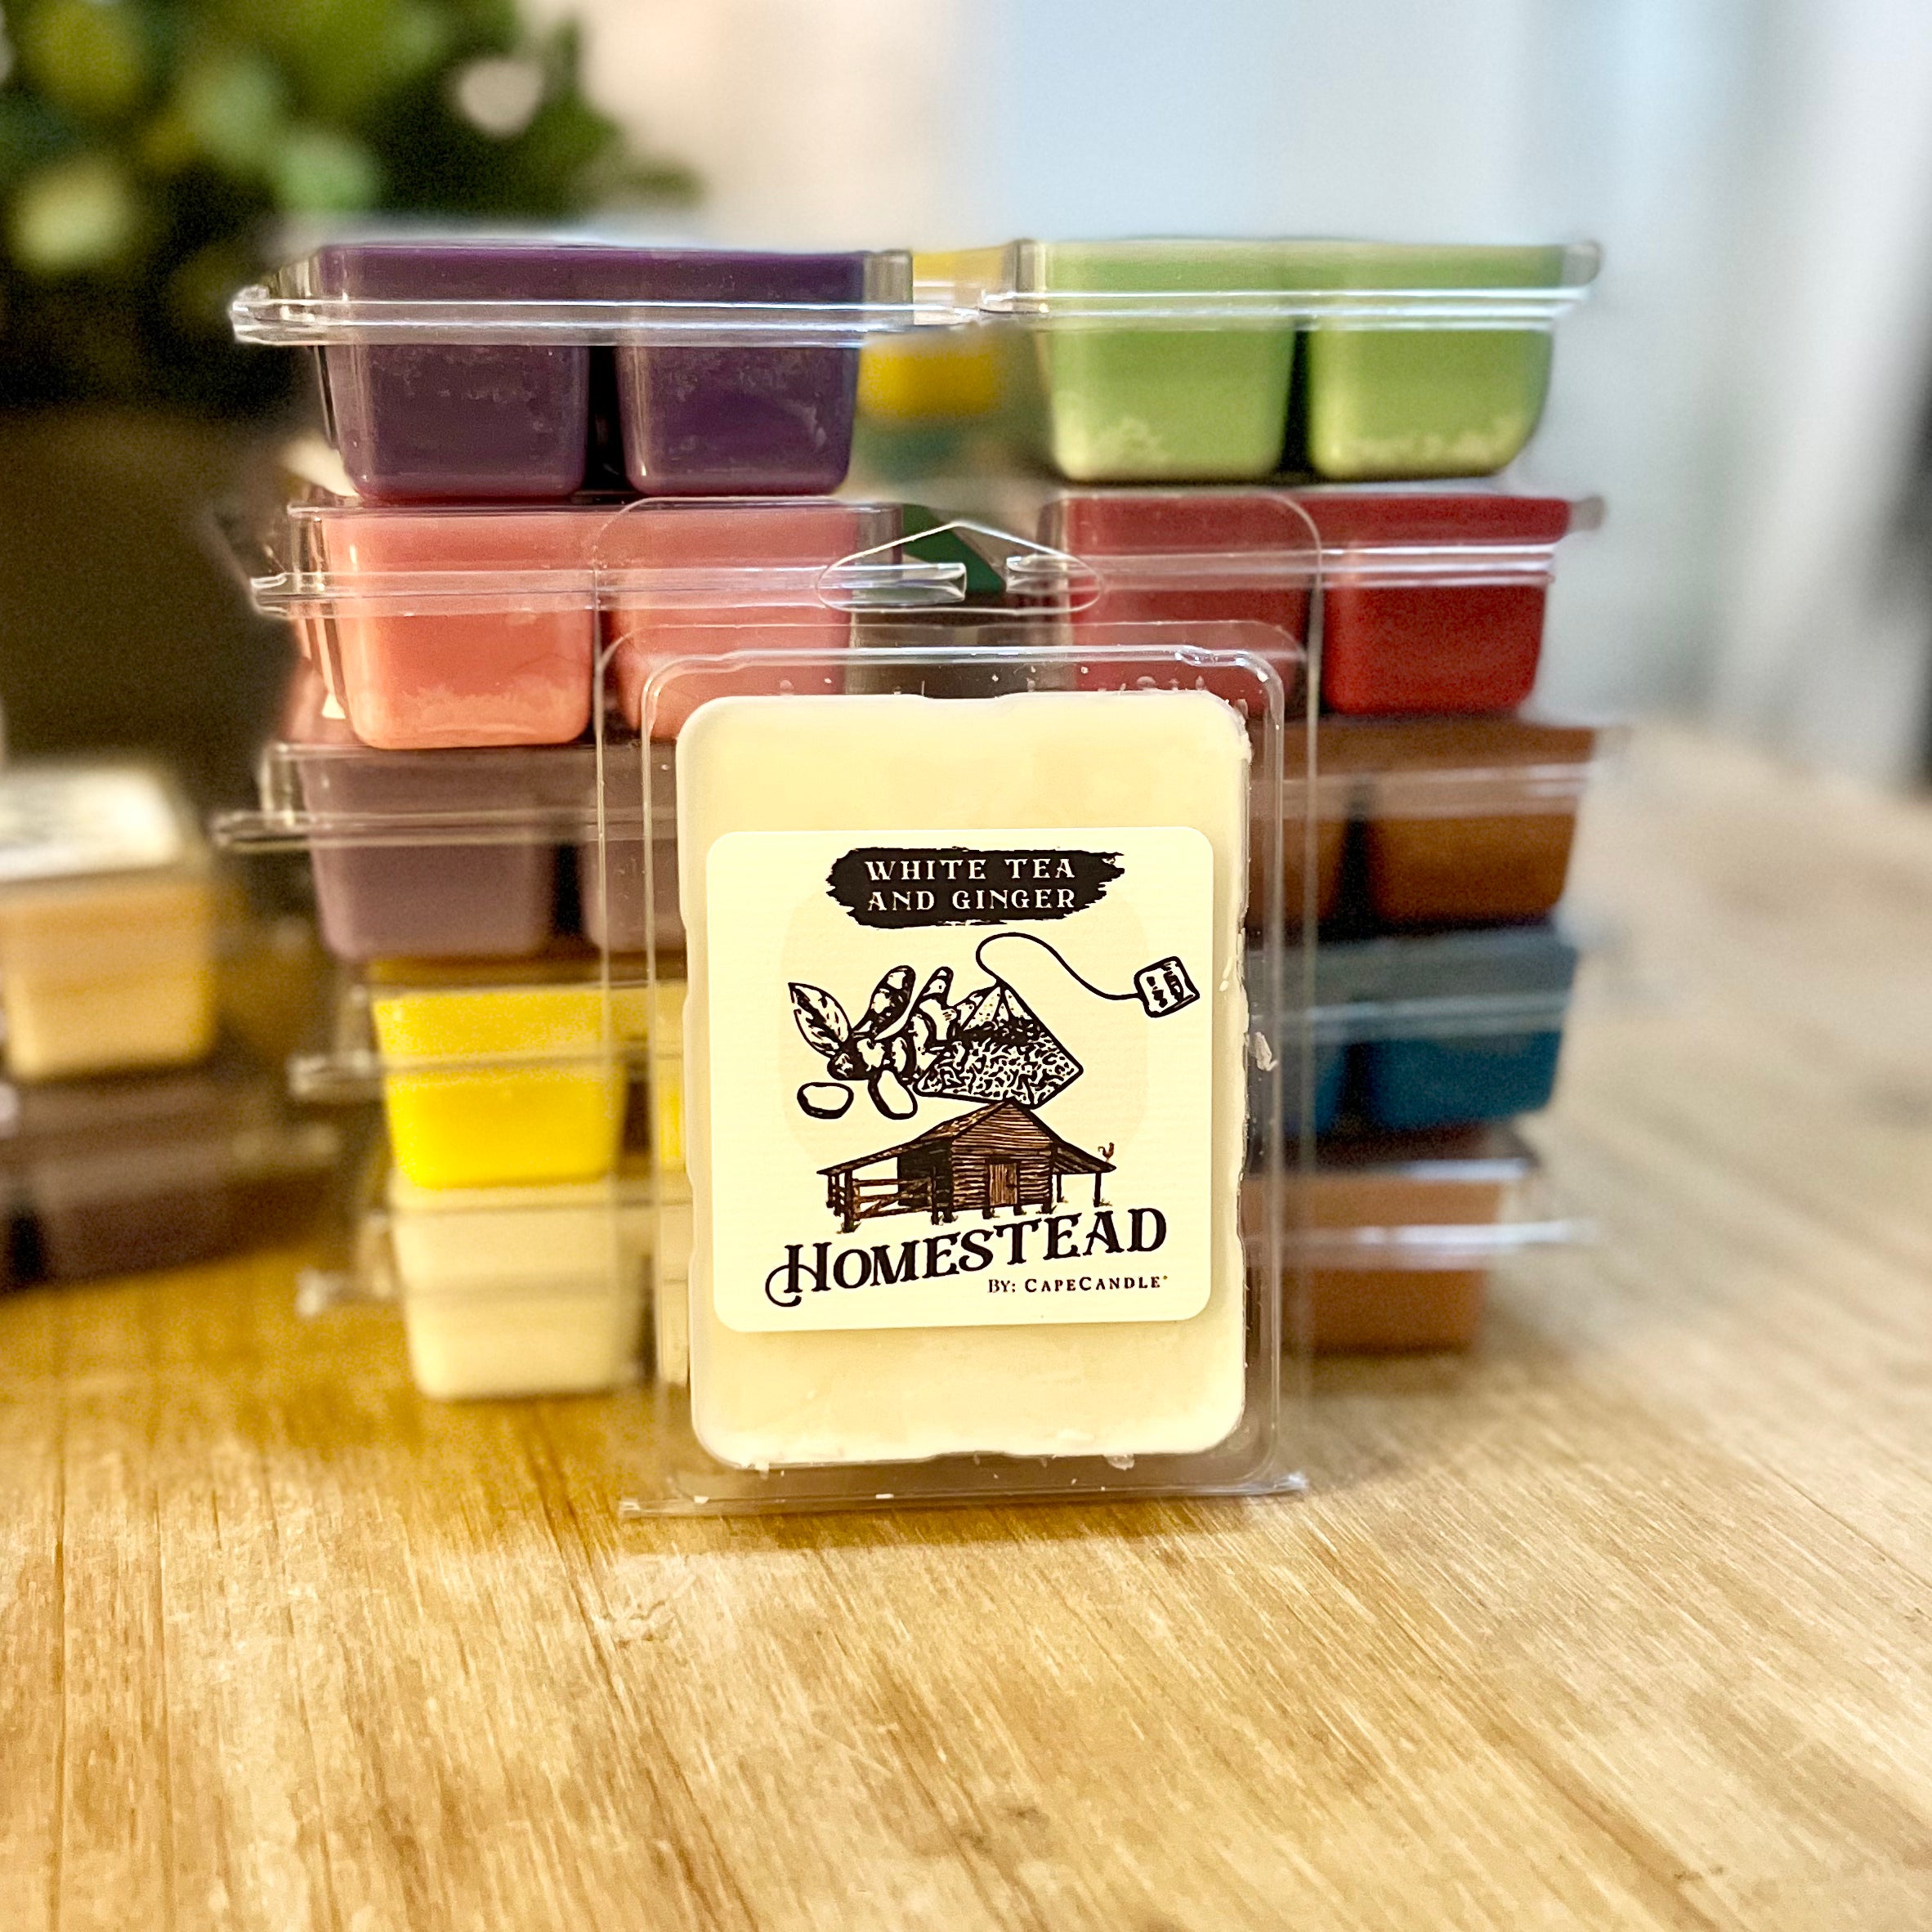 White Tea & Ginger 3.5oz Homestead Soy Wax Melts by Cape Candle